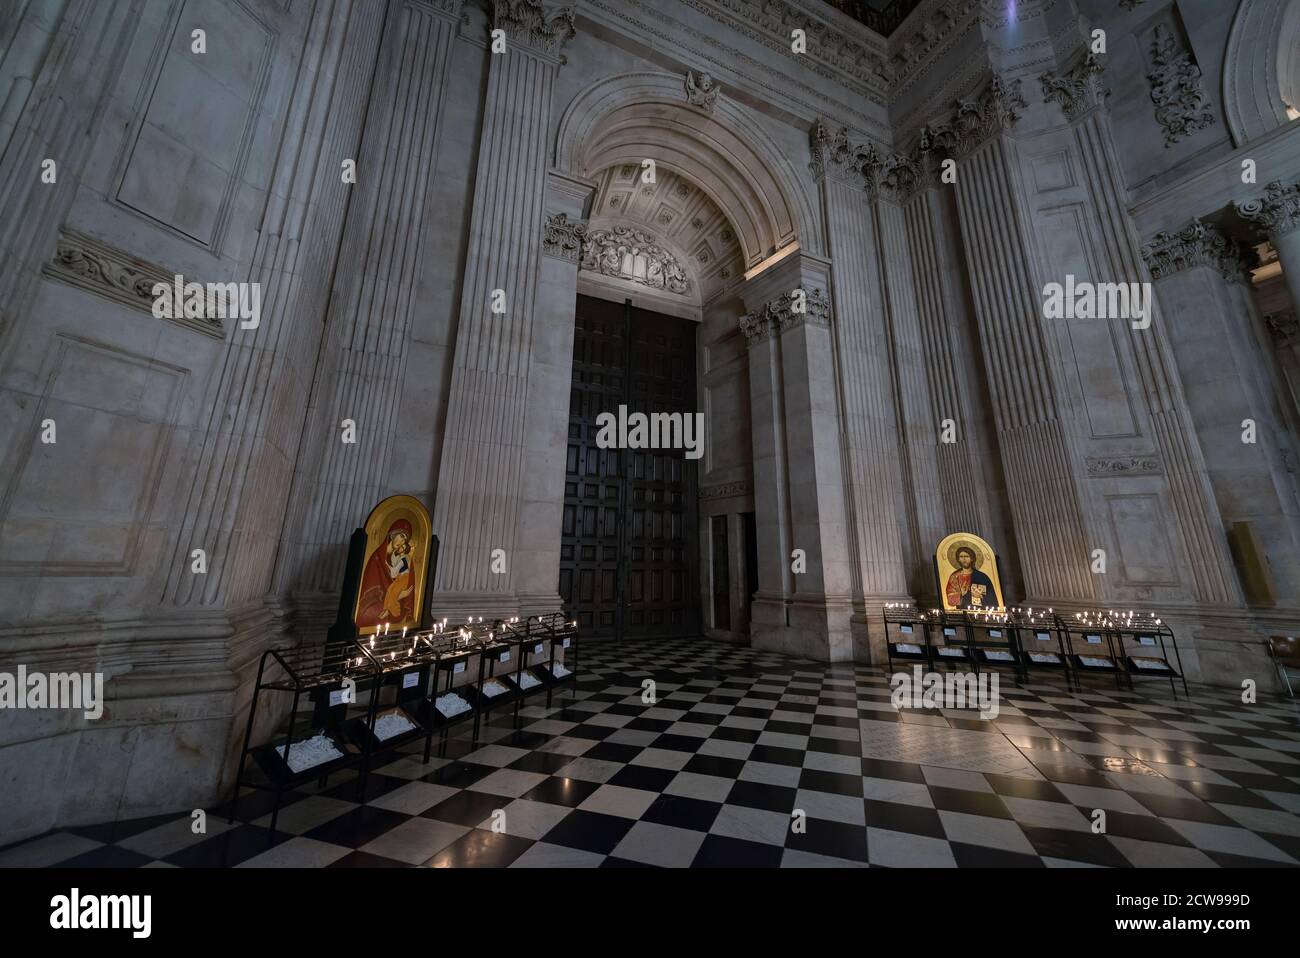 Christ Pantocrator and Mary and the Infant Jesus icons, interior of St Paul's Cathedral in London, United Kingdom Stock Photo